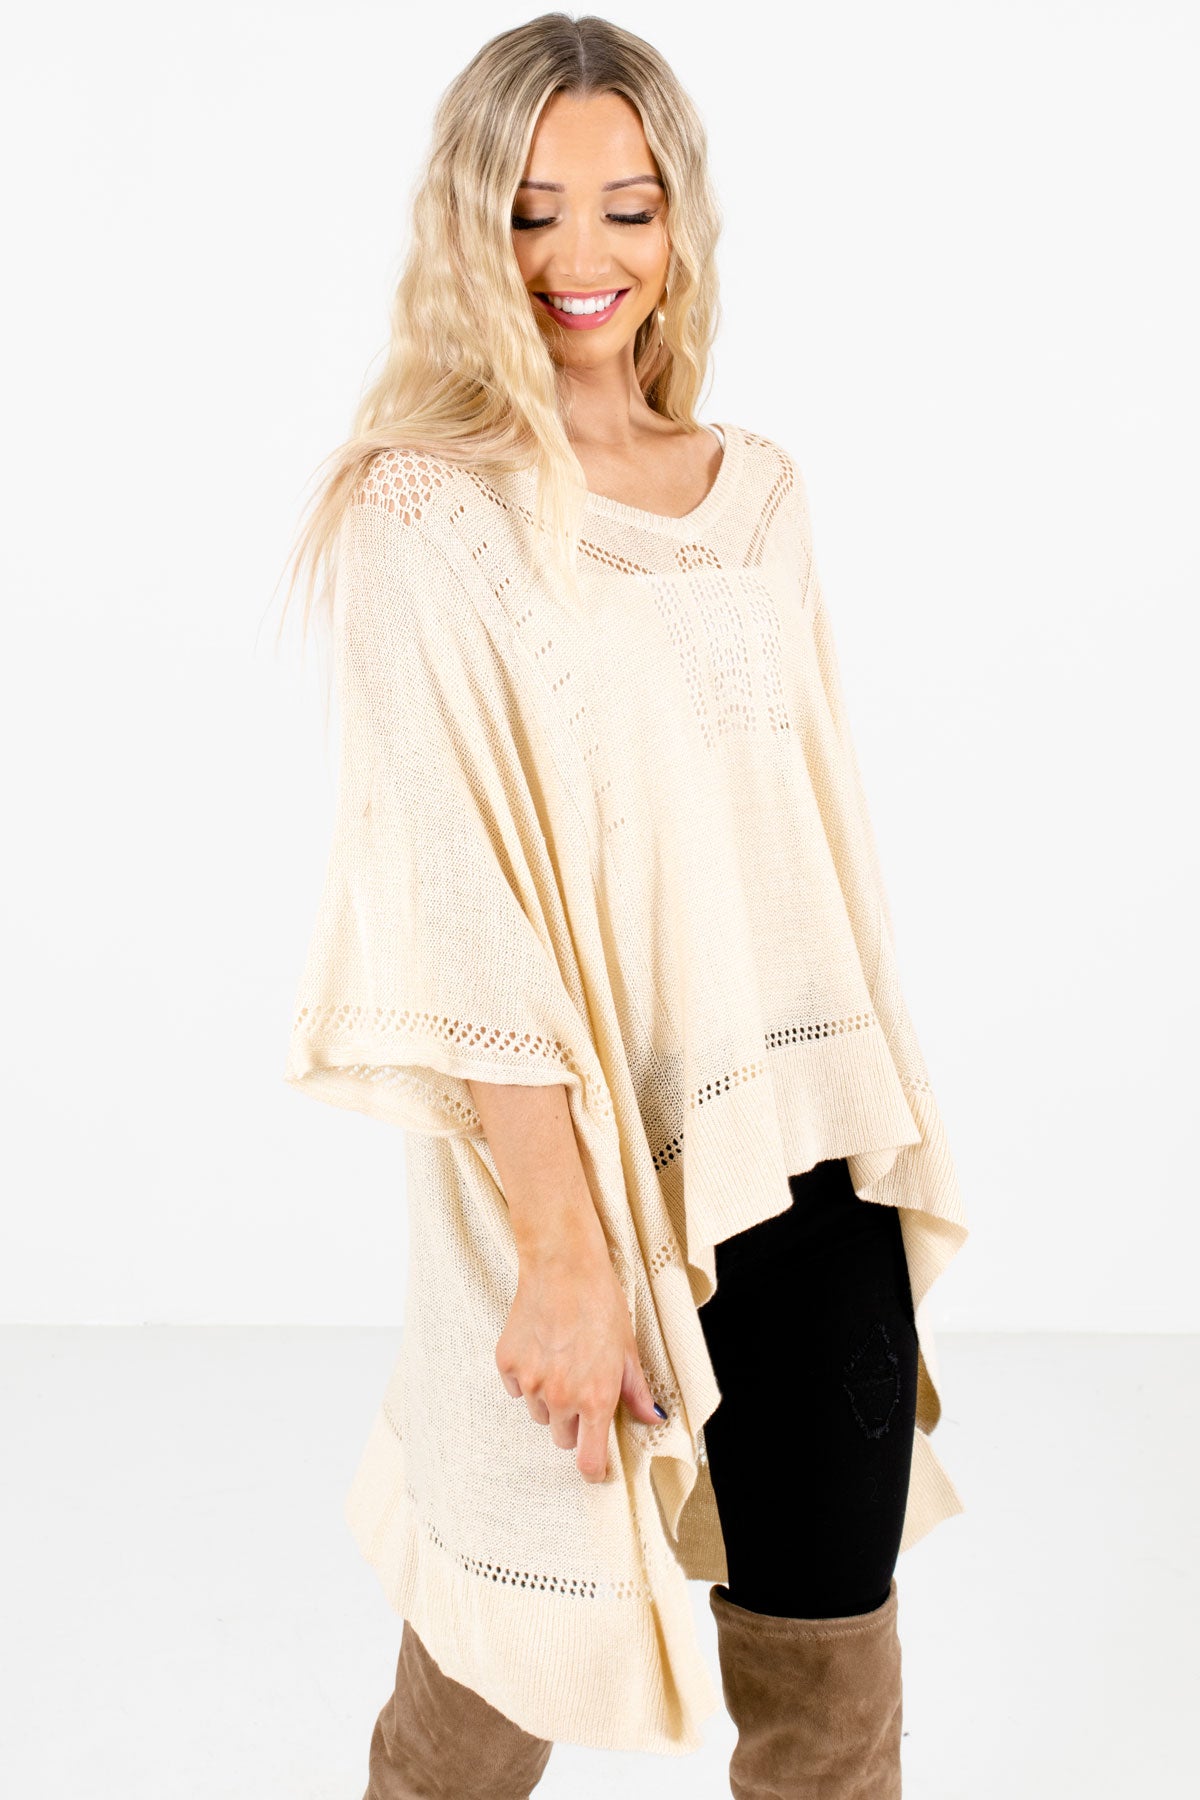 Cream Cute and Comfortable Boutique Ponchos for Women